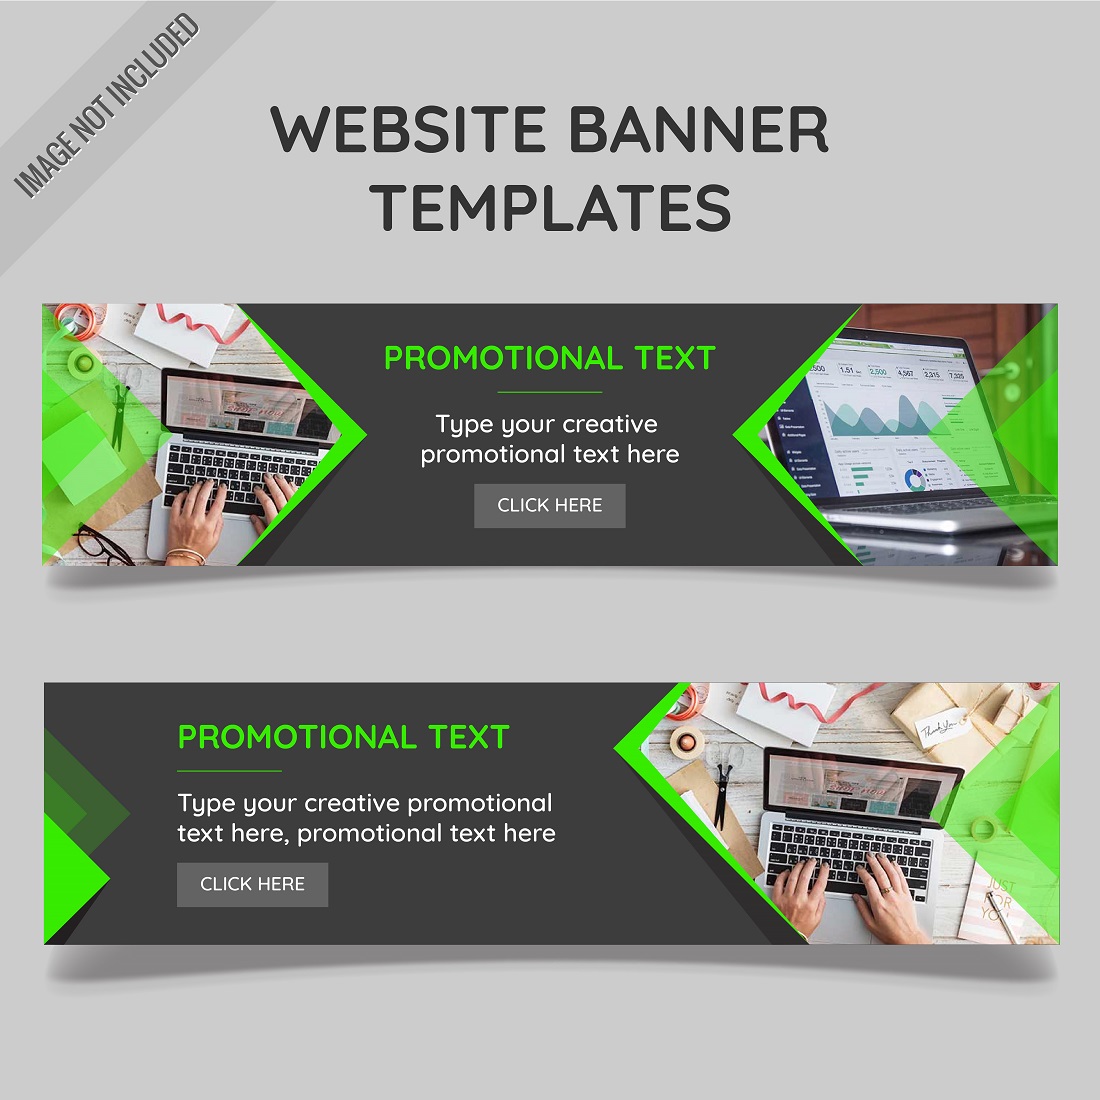 Website banner templates cover image.